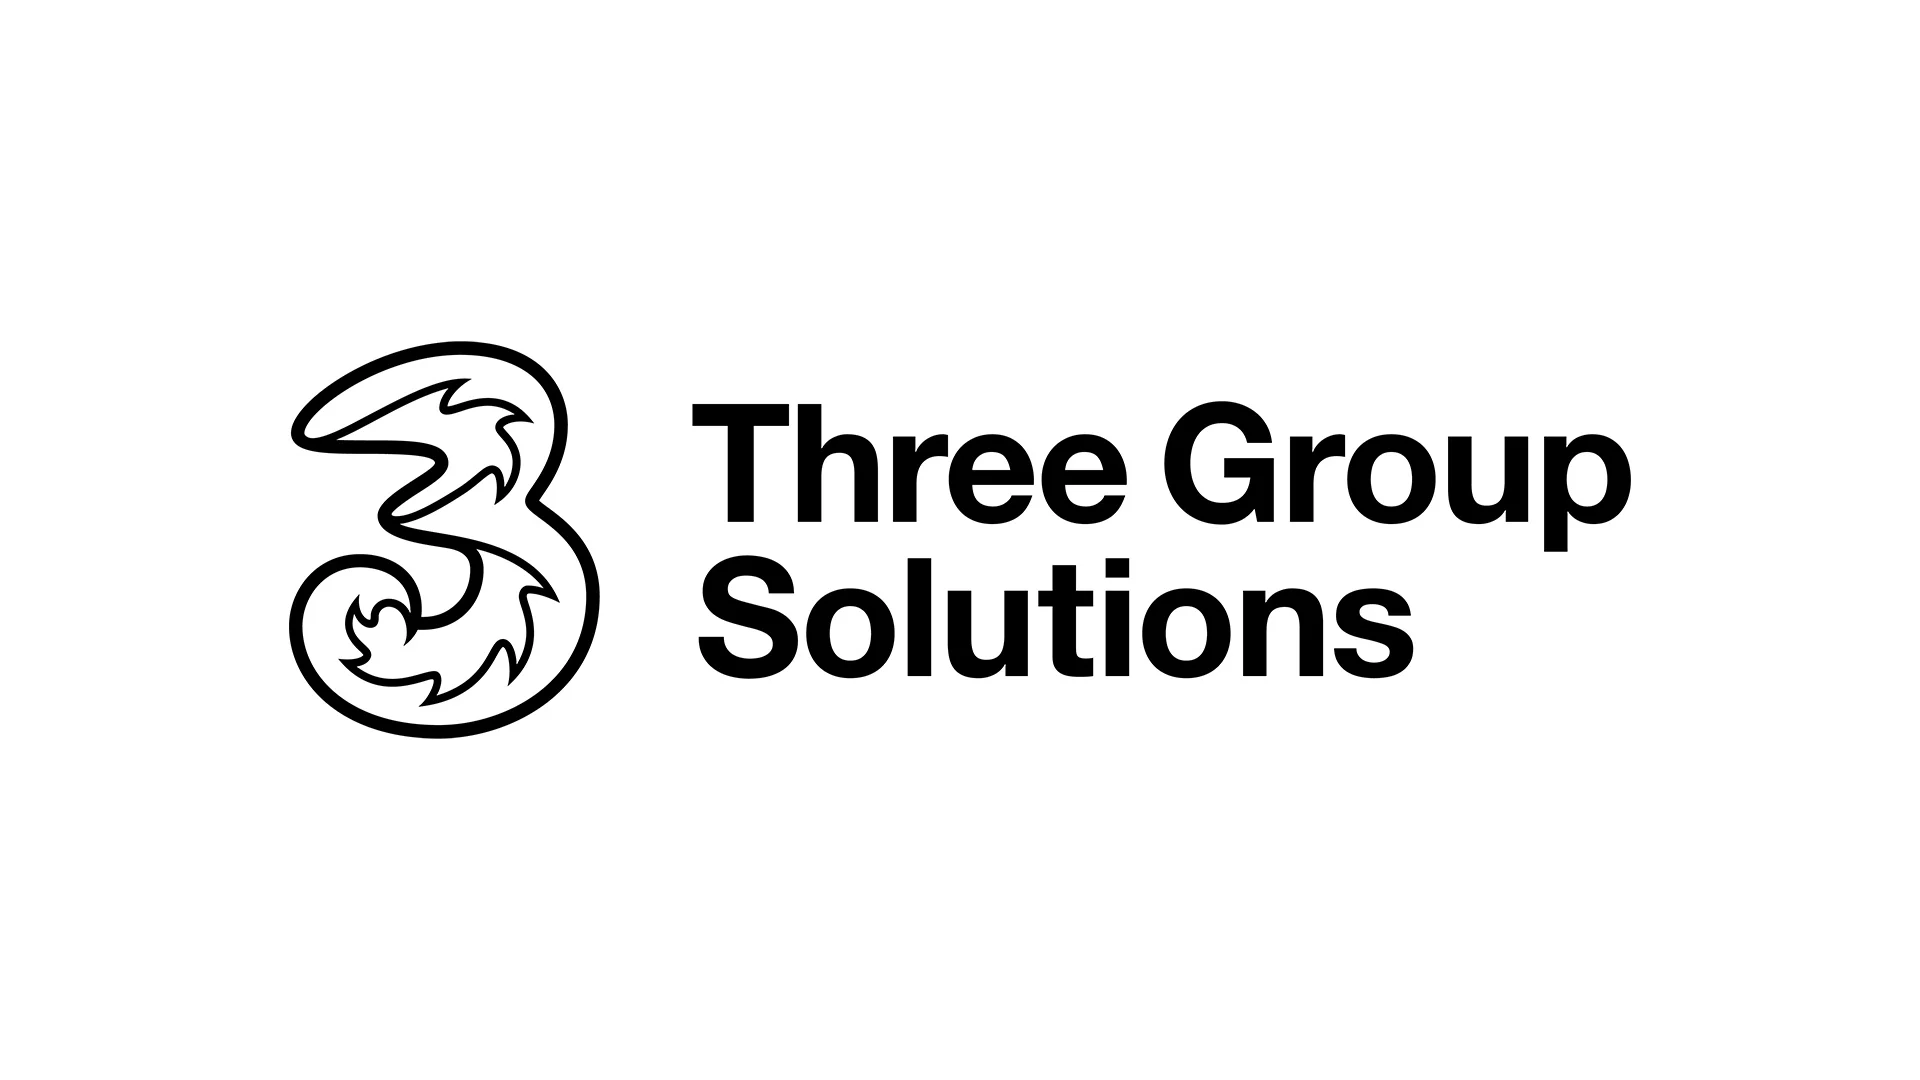 Three Group Solutions